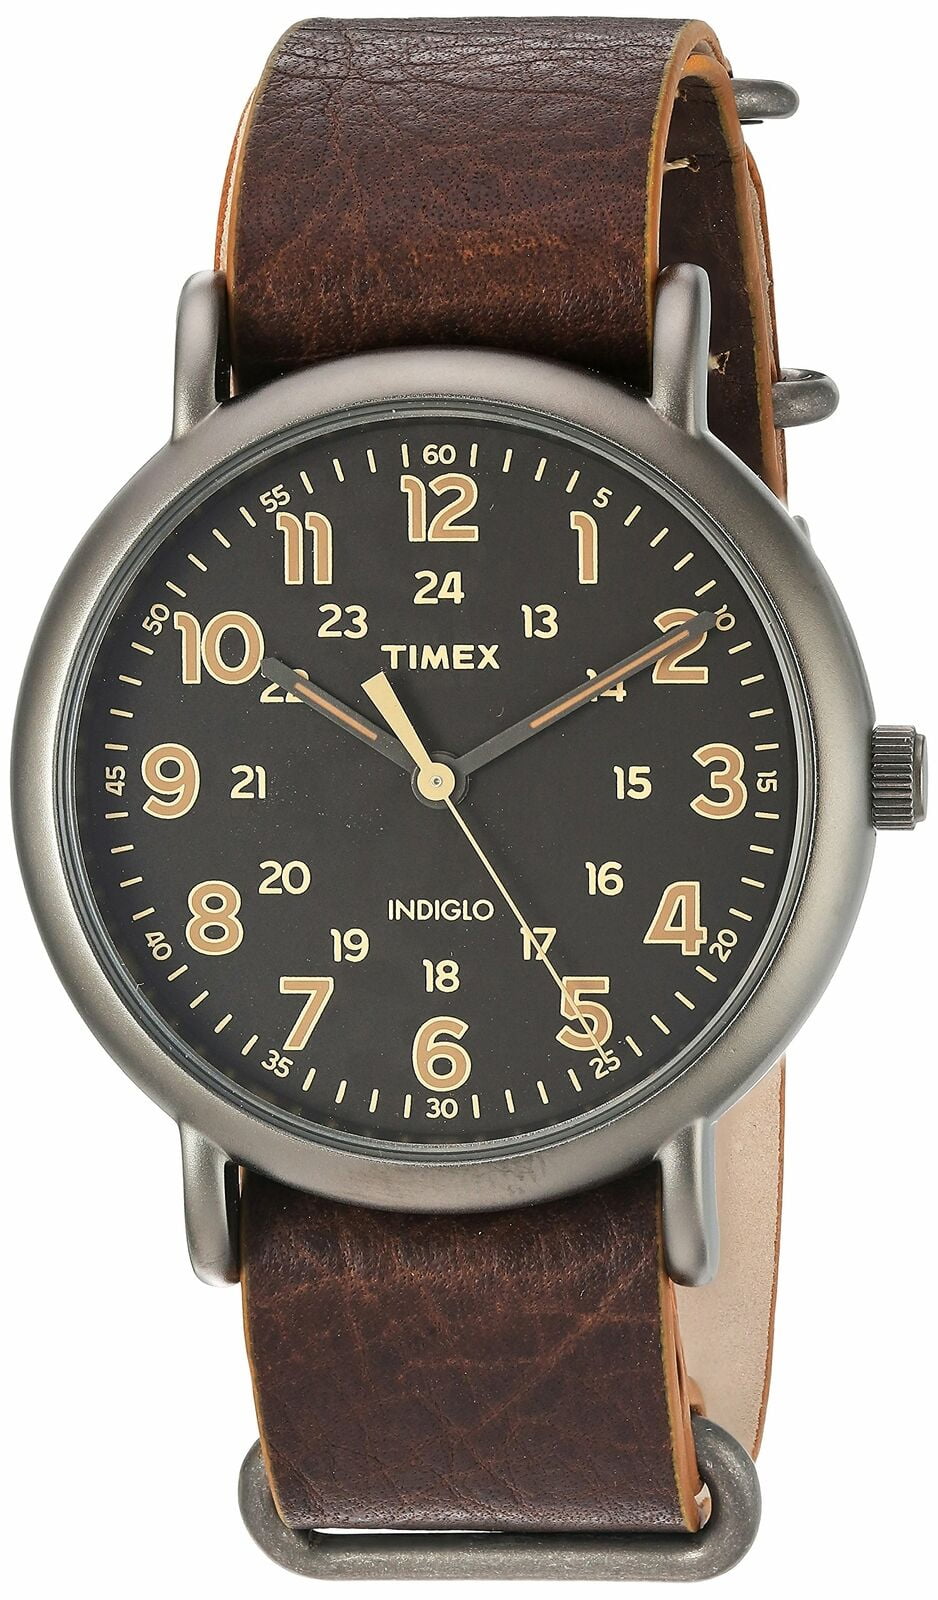 Timex TW2P85800 Men's Indiglo Weekender Vintage 40 Leather Band Analog Watch